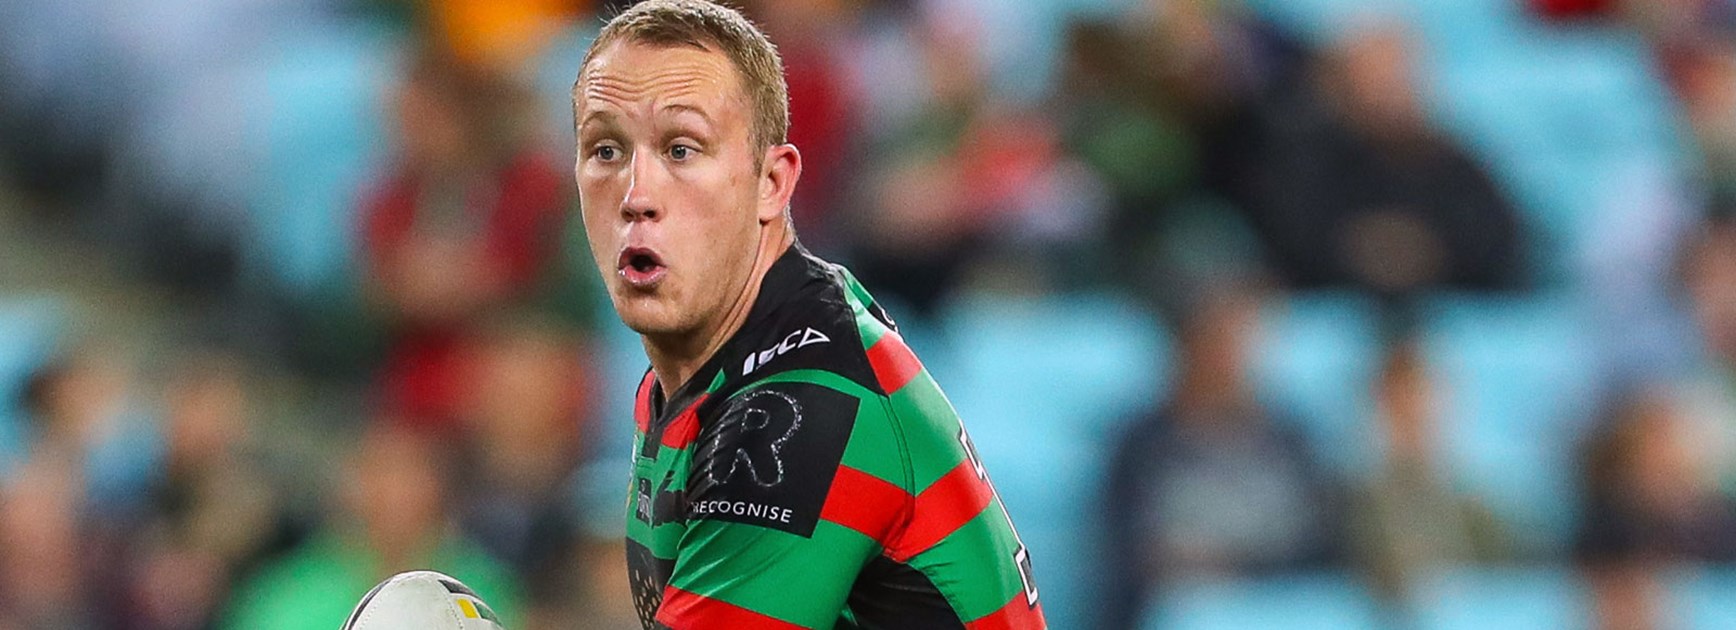 Souths forward Jason Clark has signed a contract extension to remain at the club through to the end of 2018.